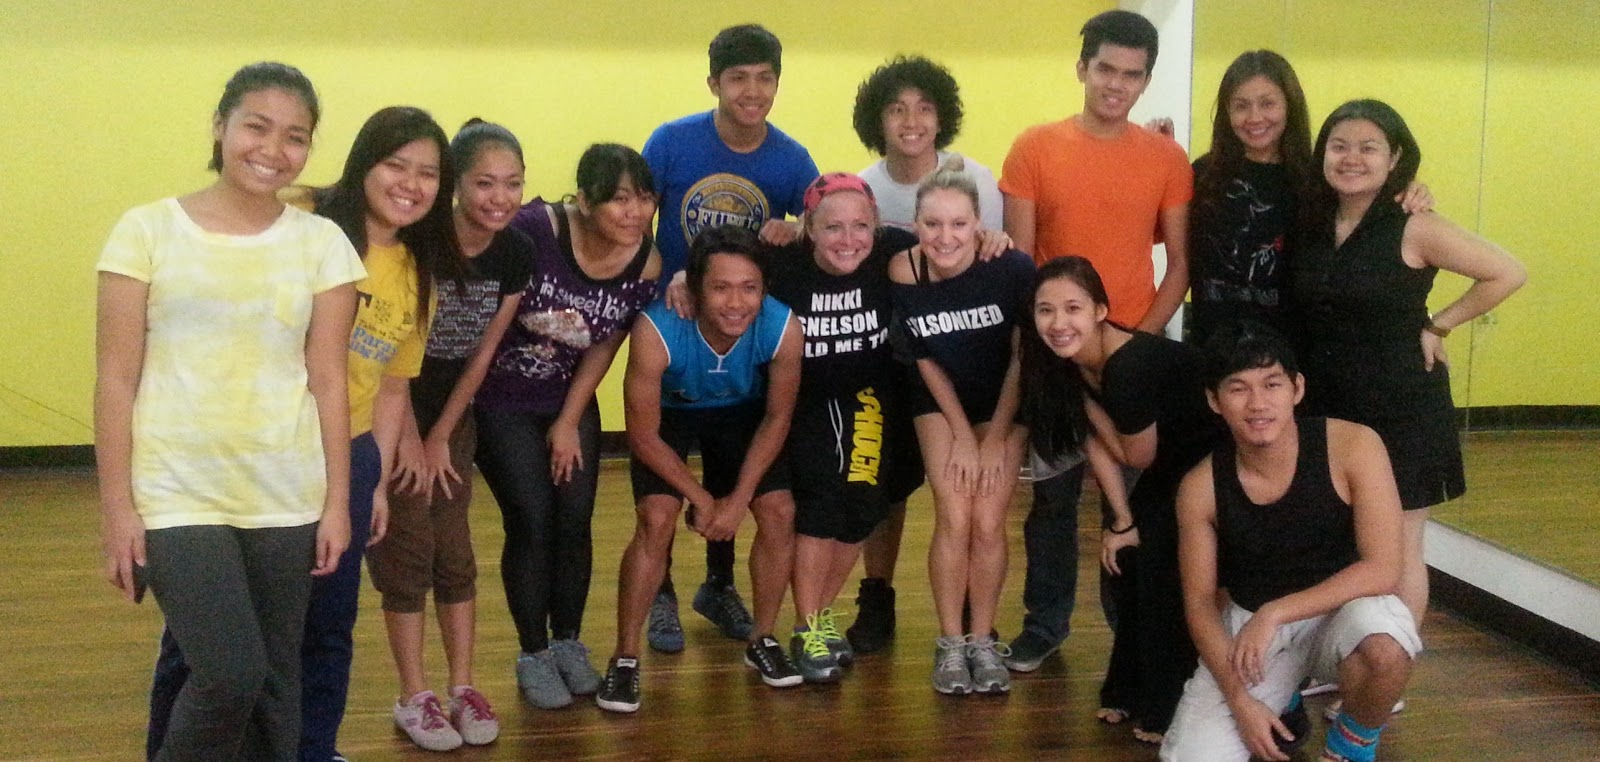 Photo Exclusive: LEGALLY BLONDE's Nikki Snelson Holds Workshop in Manila 